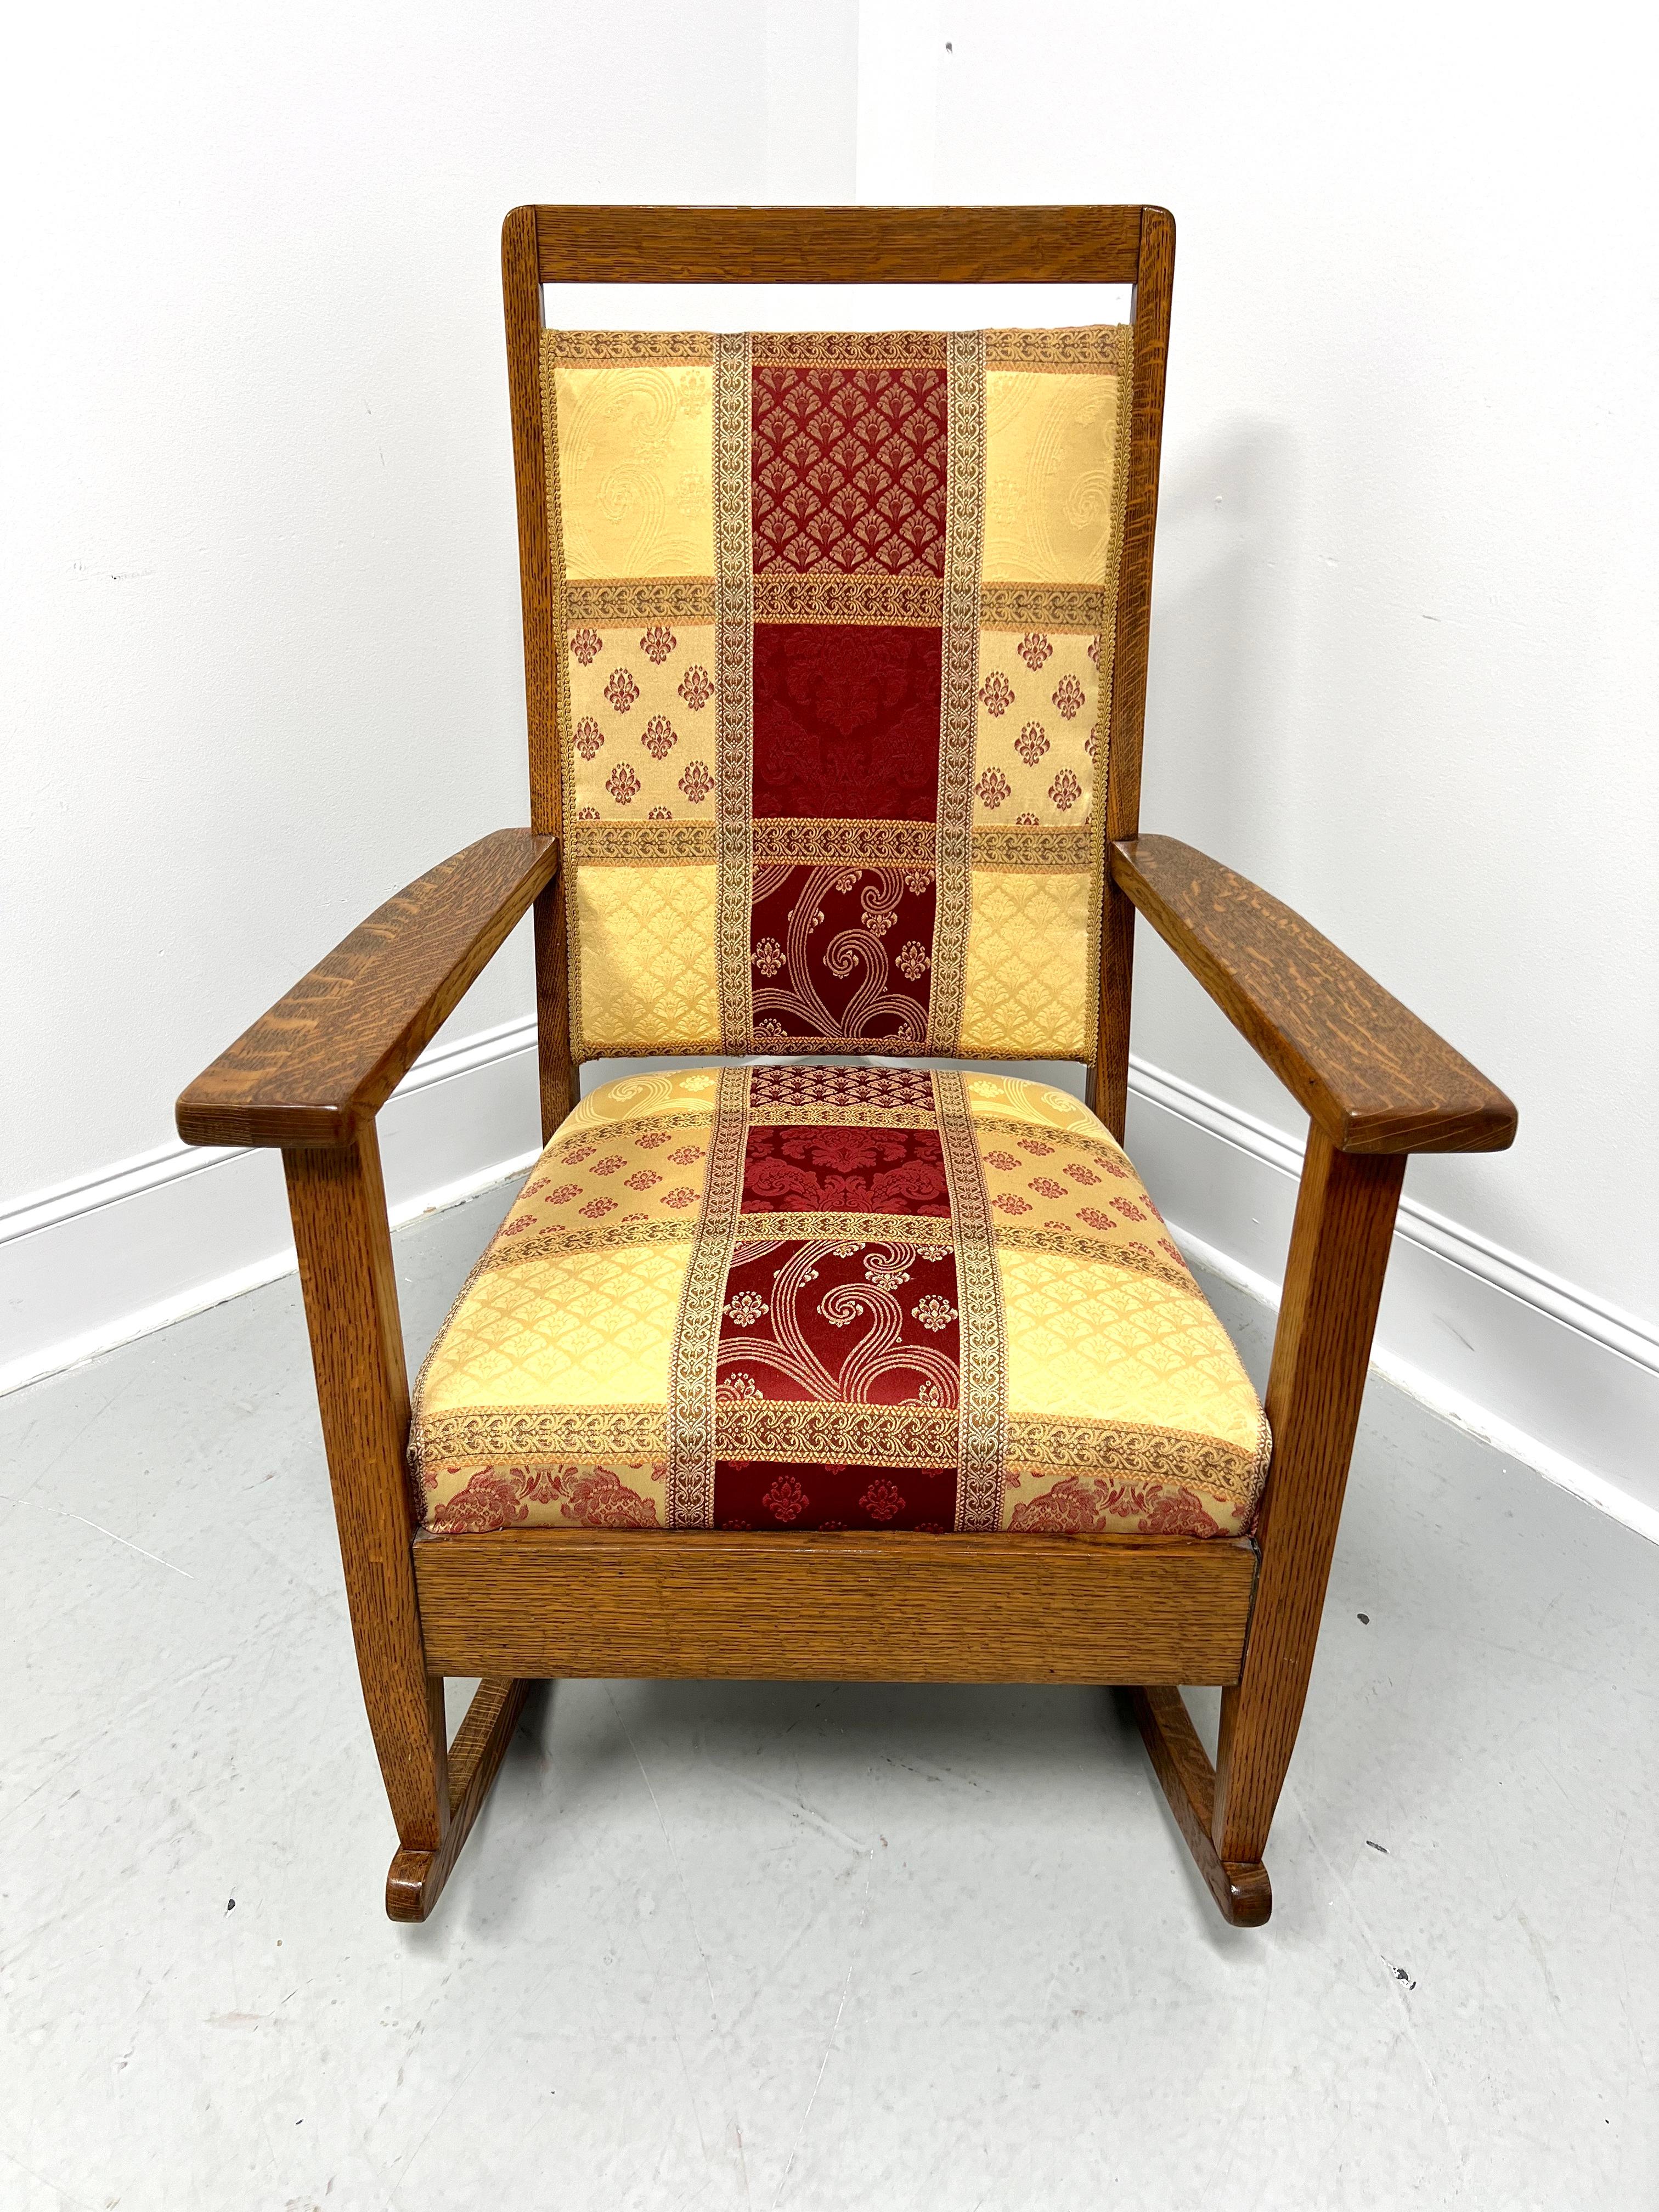 An Arts & Crafts period upholstered rocking chair, unbranded. Solid quartersawn tiger oak, raised solid crestrail, upholstered backrest & seat in a red, beige, & gold color plaid-like fabric, flat arms with square supports, solid broad apron,